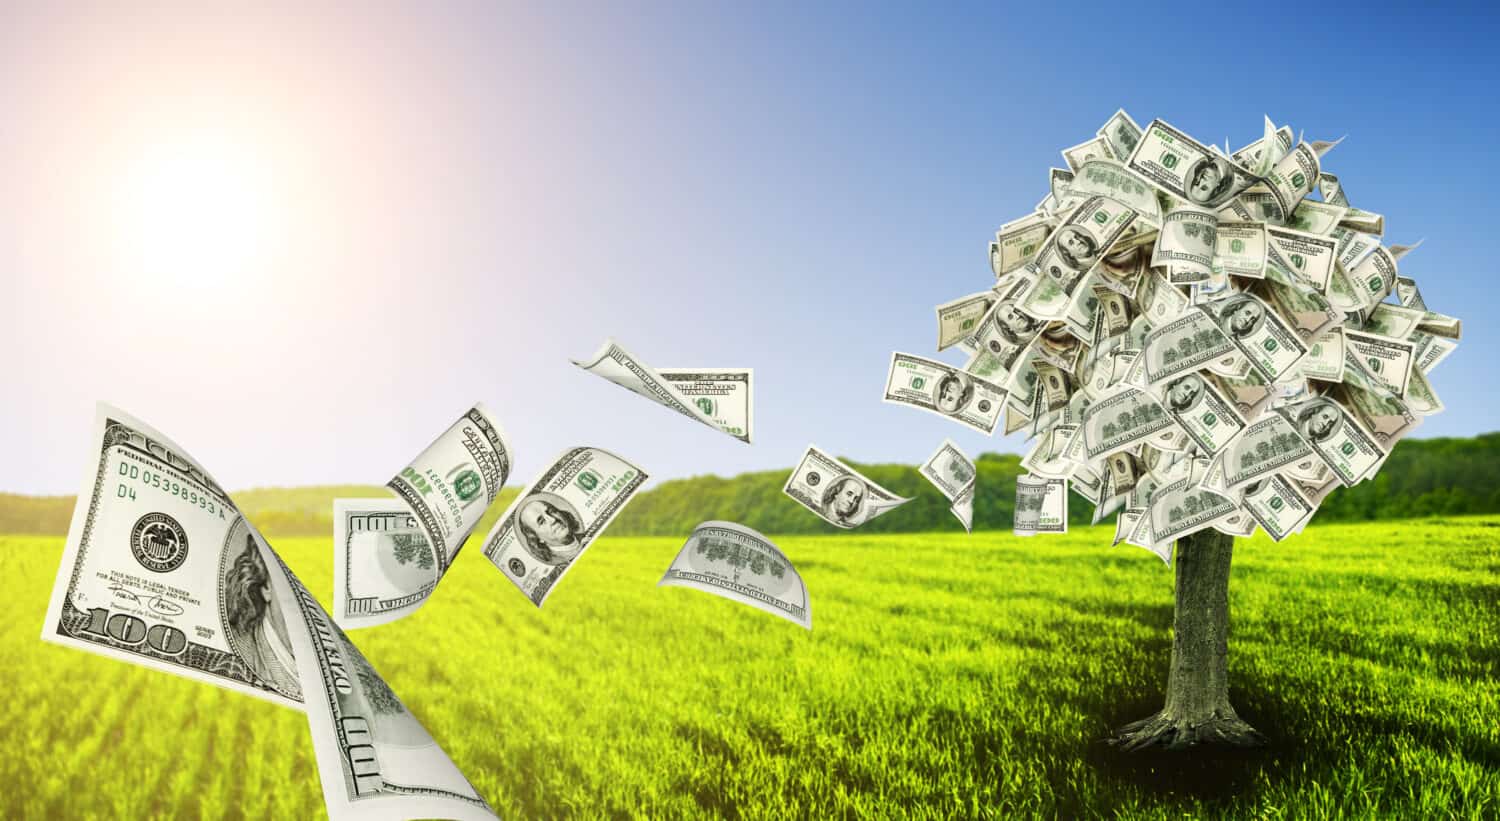 Money tree growing in the middle of green meadow